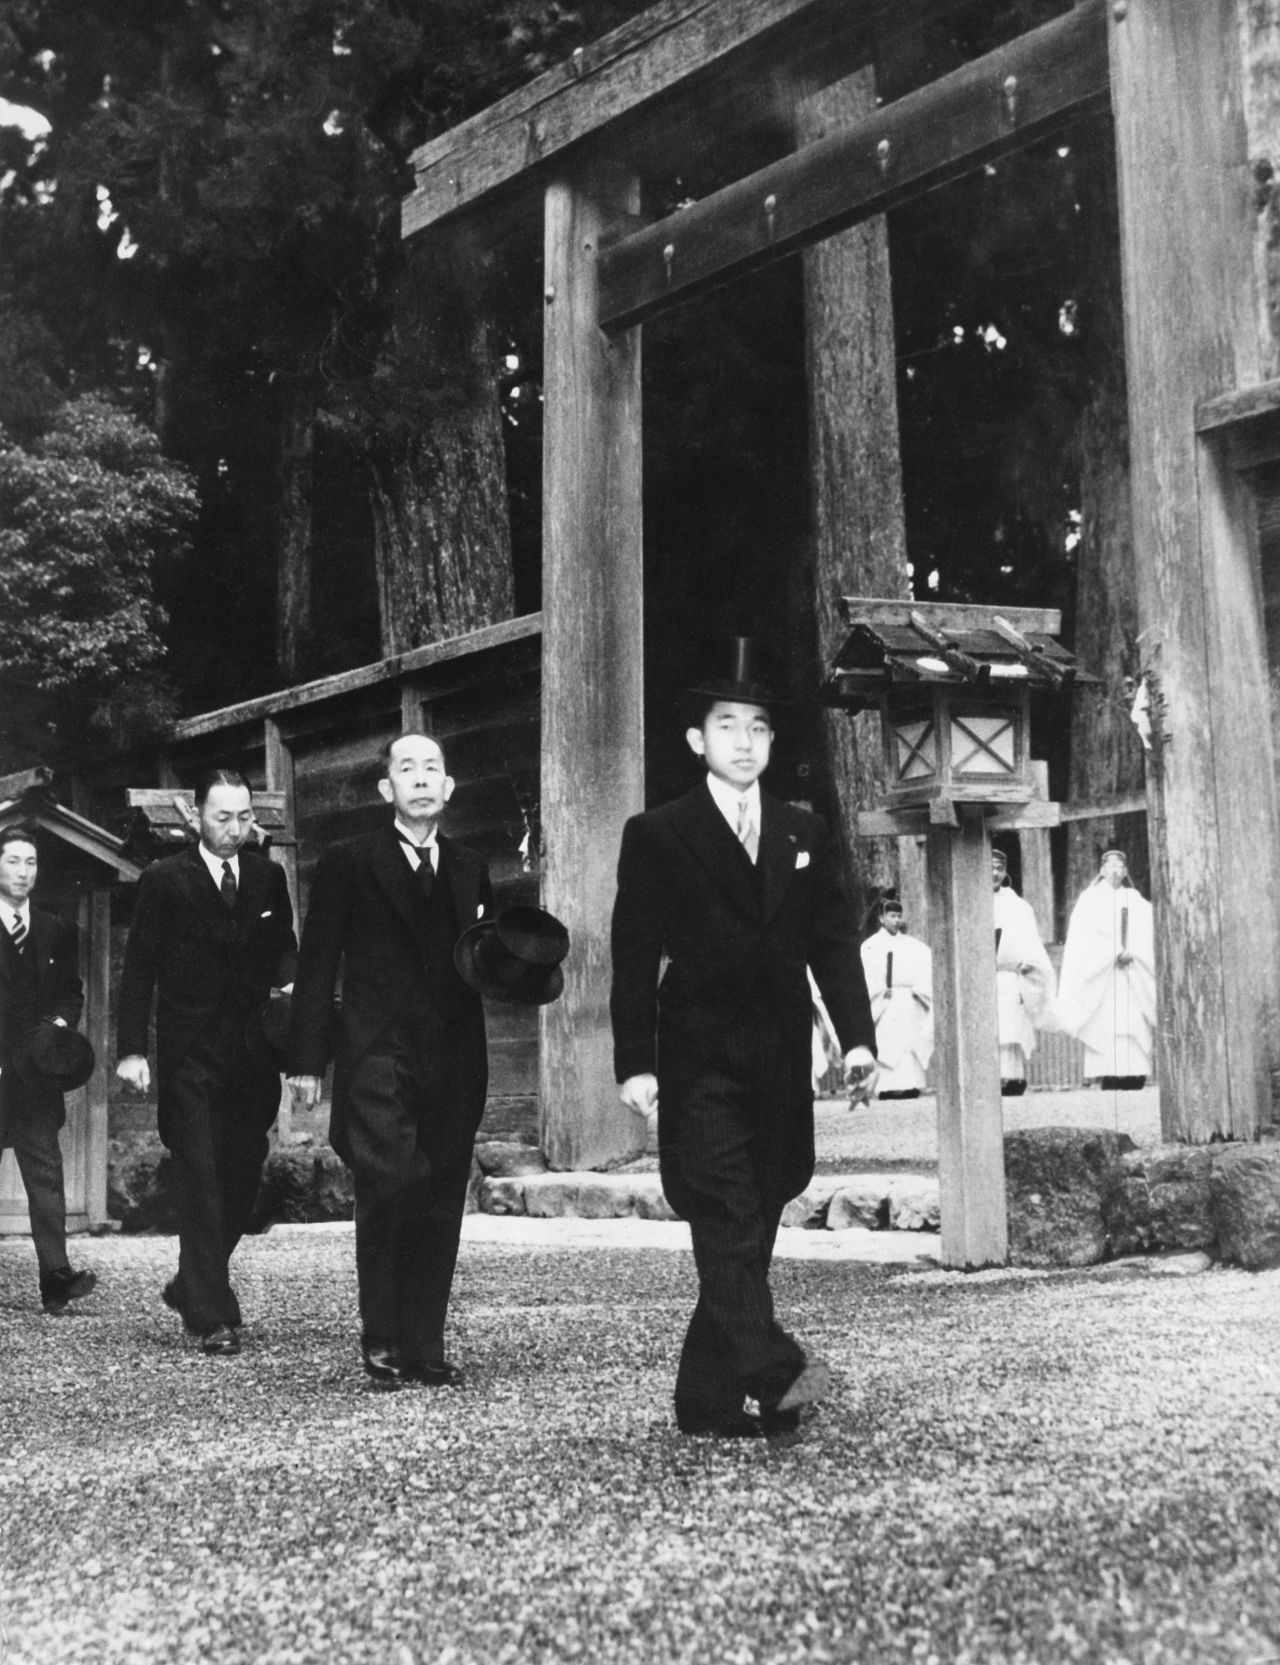 Akihito photographed wearing a top hat and a suit on his wedding day at the Meiji Shrine in Tokyo, on April 10, 1959. The ceremony made Michiko Shoda, a commoner, the future empress of Japan, breaking with over 2,000 years of tradition.